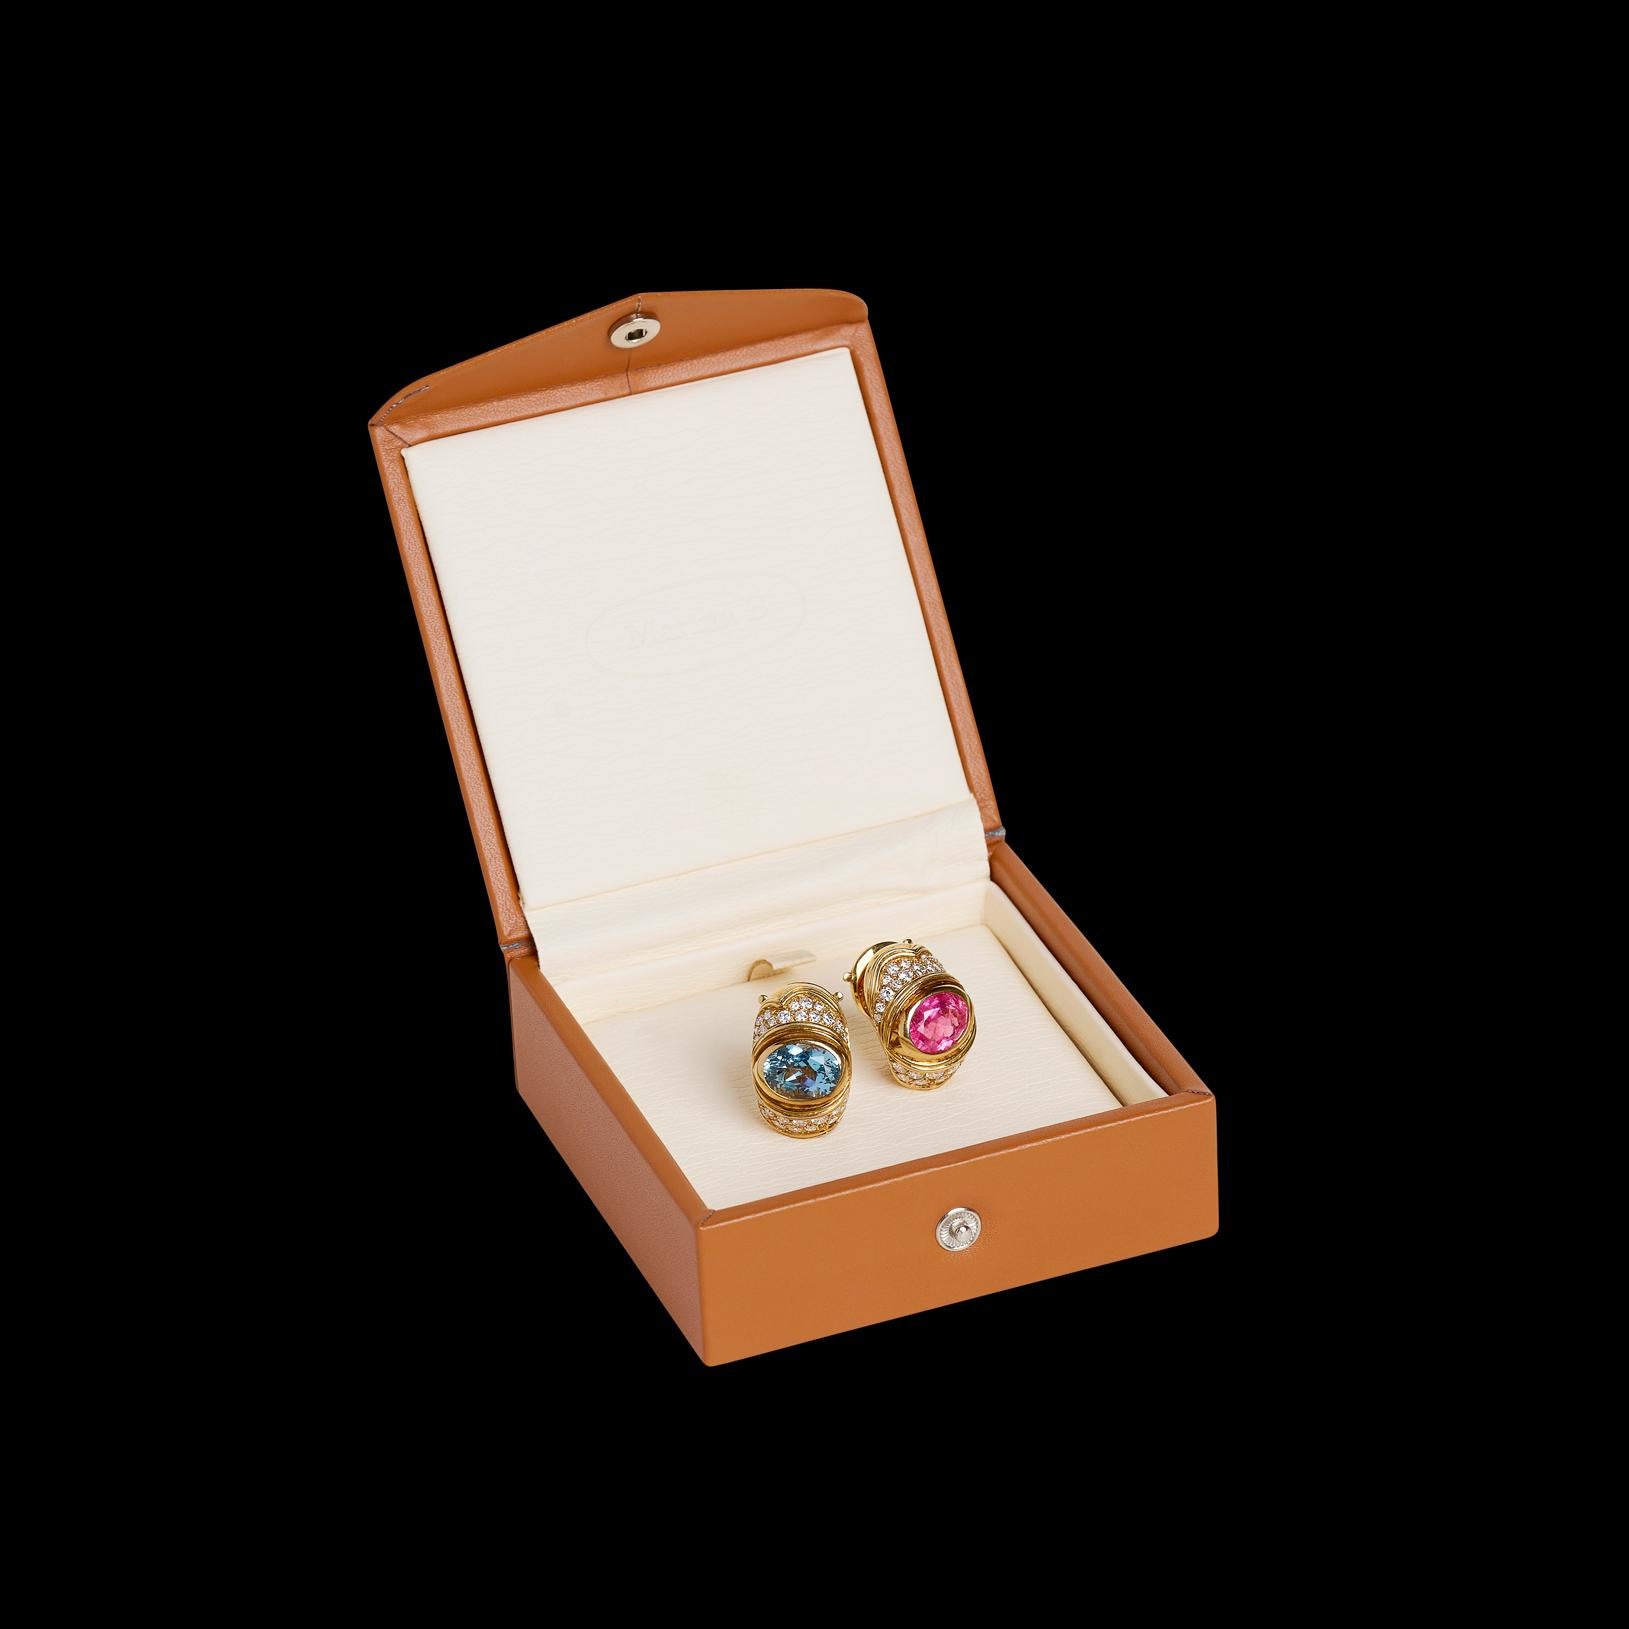 The pop of color that every collection deserves! From famed designer Marina Bulgari come these 18 karat yellow gold earrings featuring a 3.30 carat pink tourmaline and a 3.30 carat blue topaz, accented by 1.58 carats of fine white diamonds. The